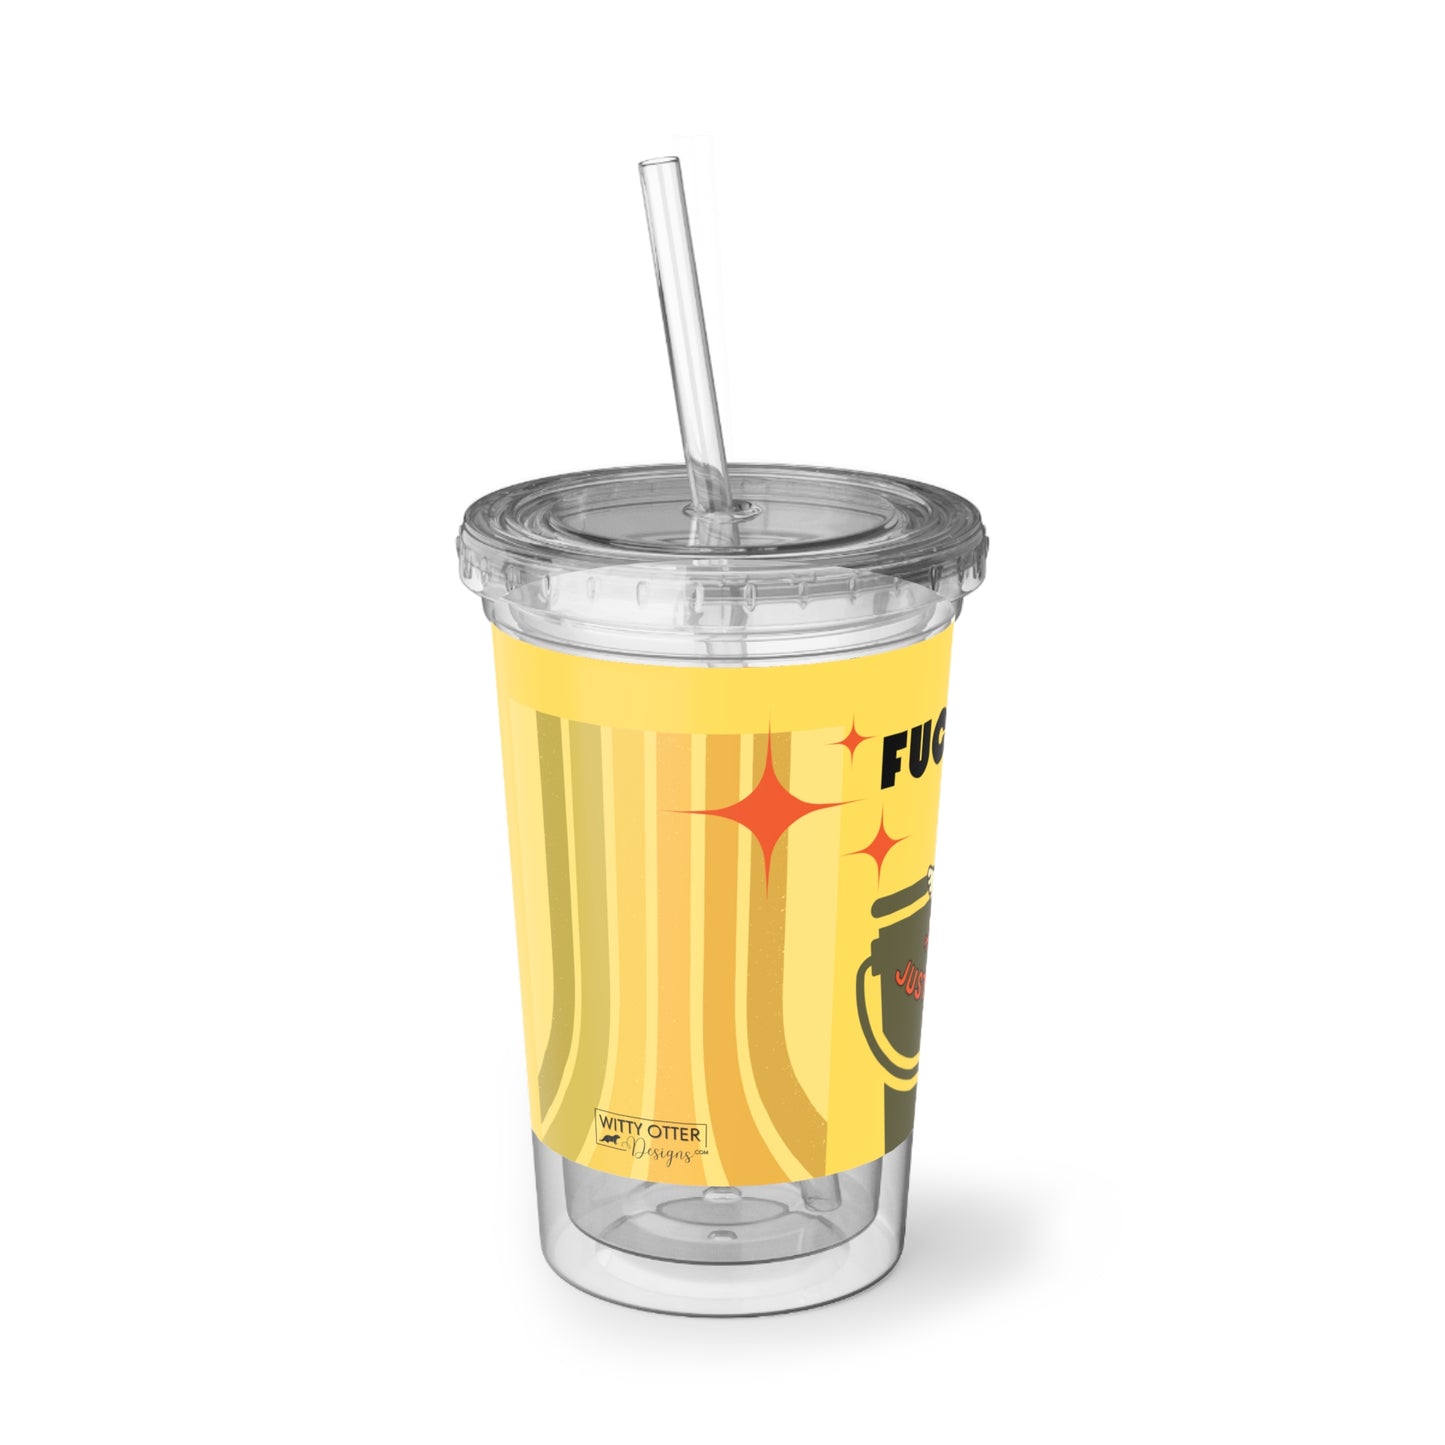 "Just wing it" motivational cup /BPA approved cup, motivational, inspirational gift cup